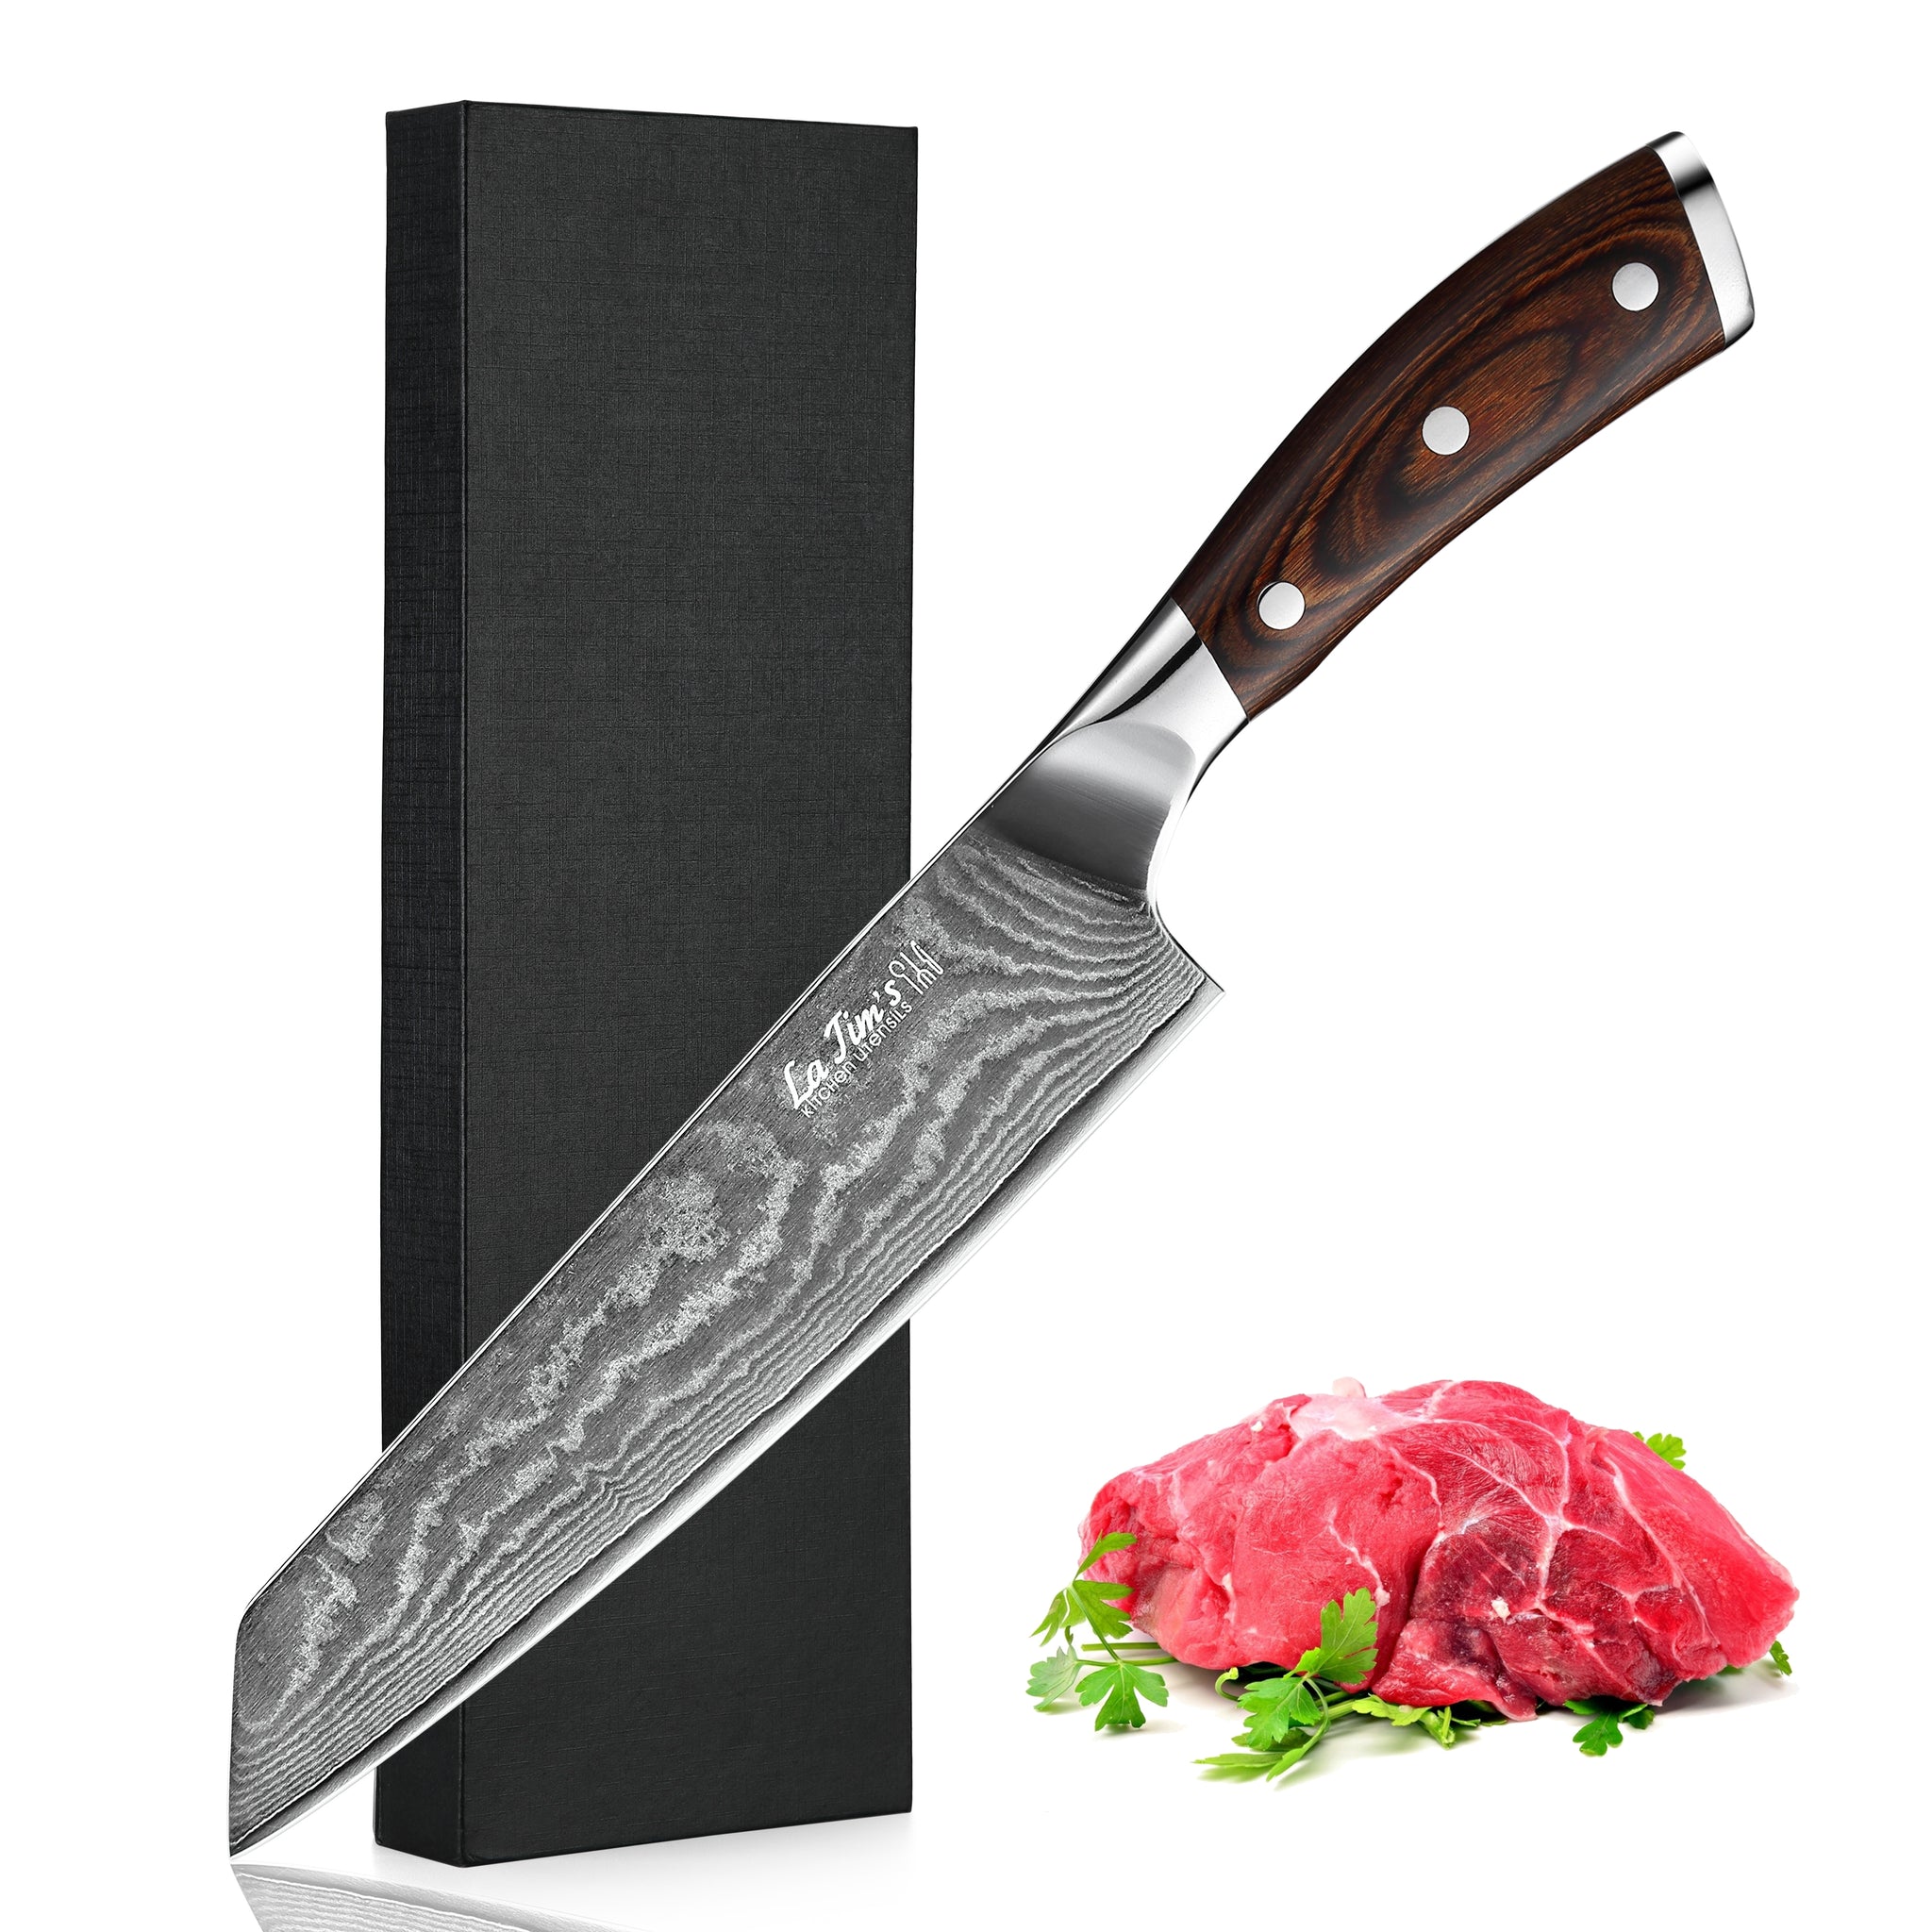 Latim's Professional Chef Knife 8 inch，Damascus Kitchen Knives Made of Japanese VG-10 Stainless Steel with Unique Pattern，Ultra Sharp Blade and Ergonomic Handle